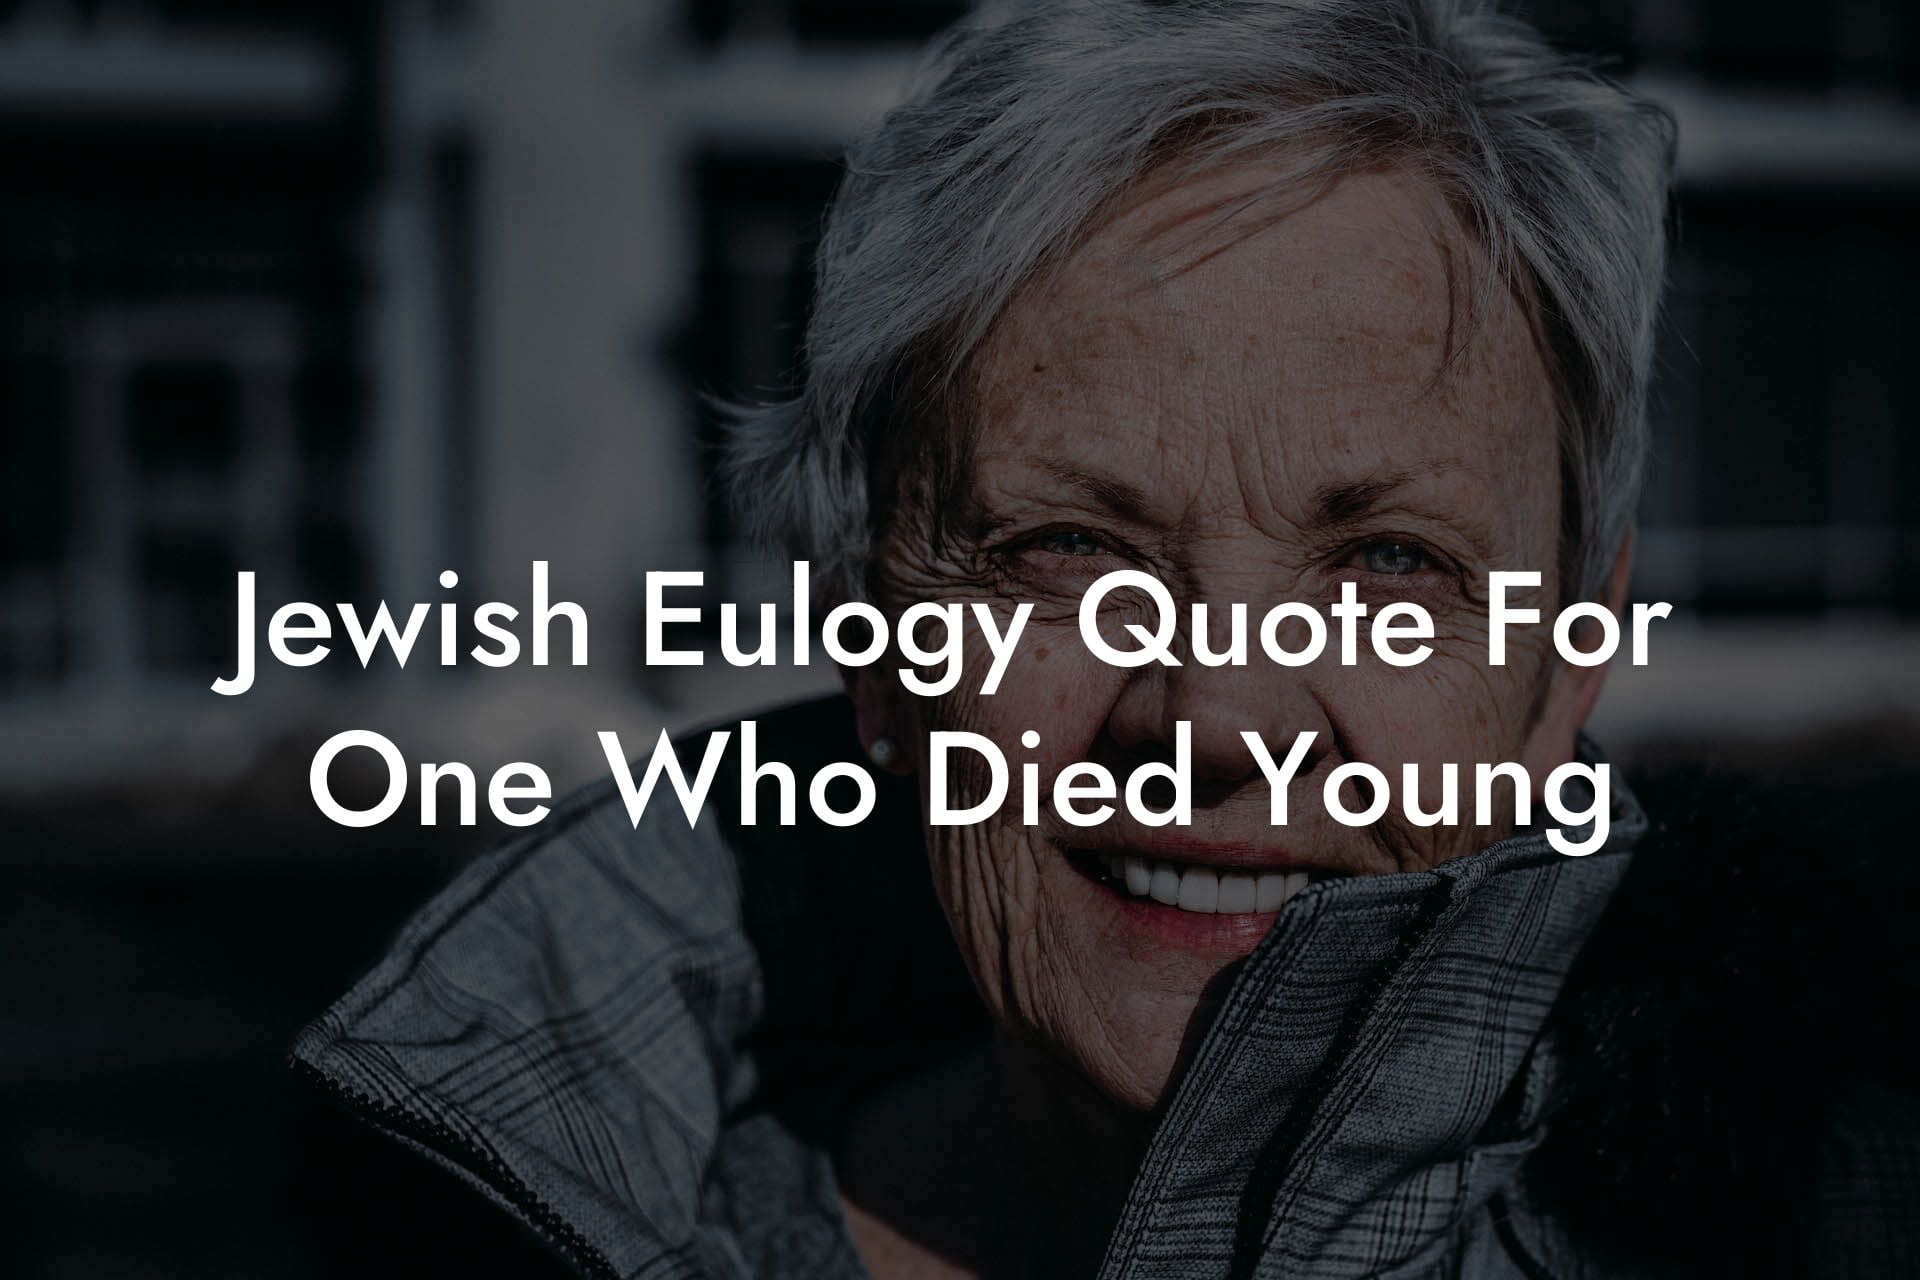 Jewish Eulogy Quote For One Who Died Young